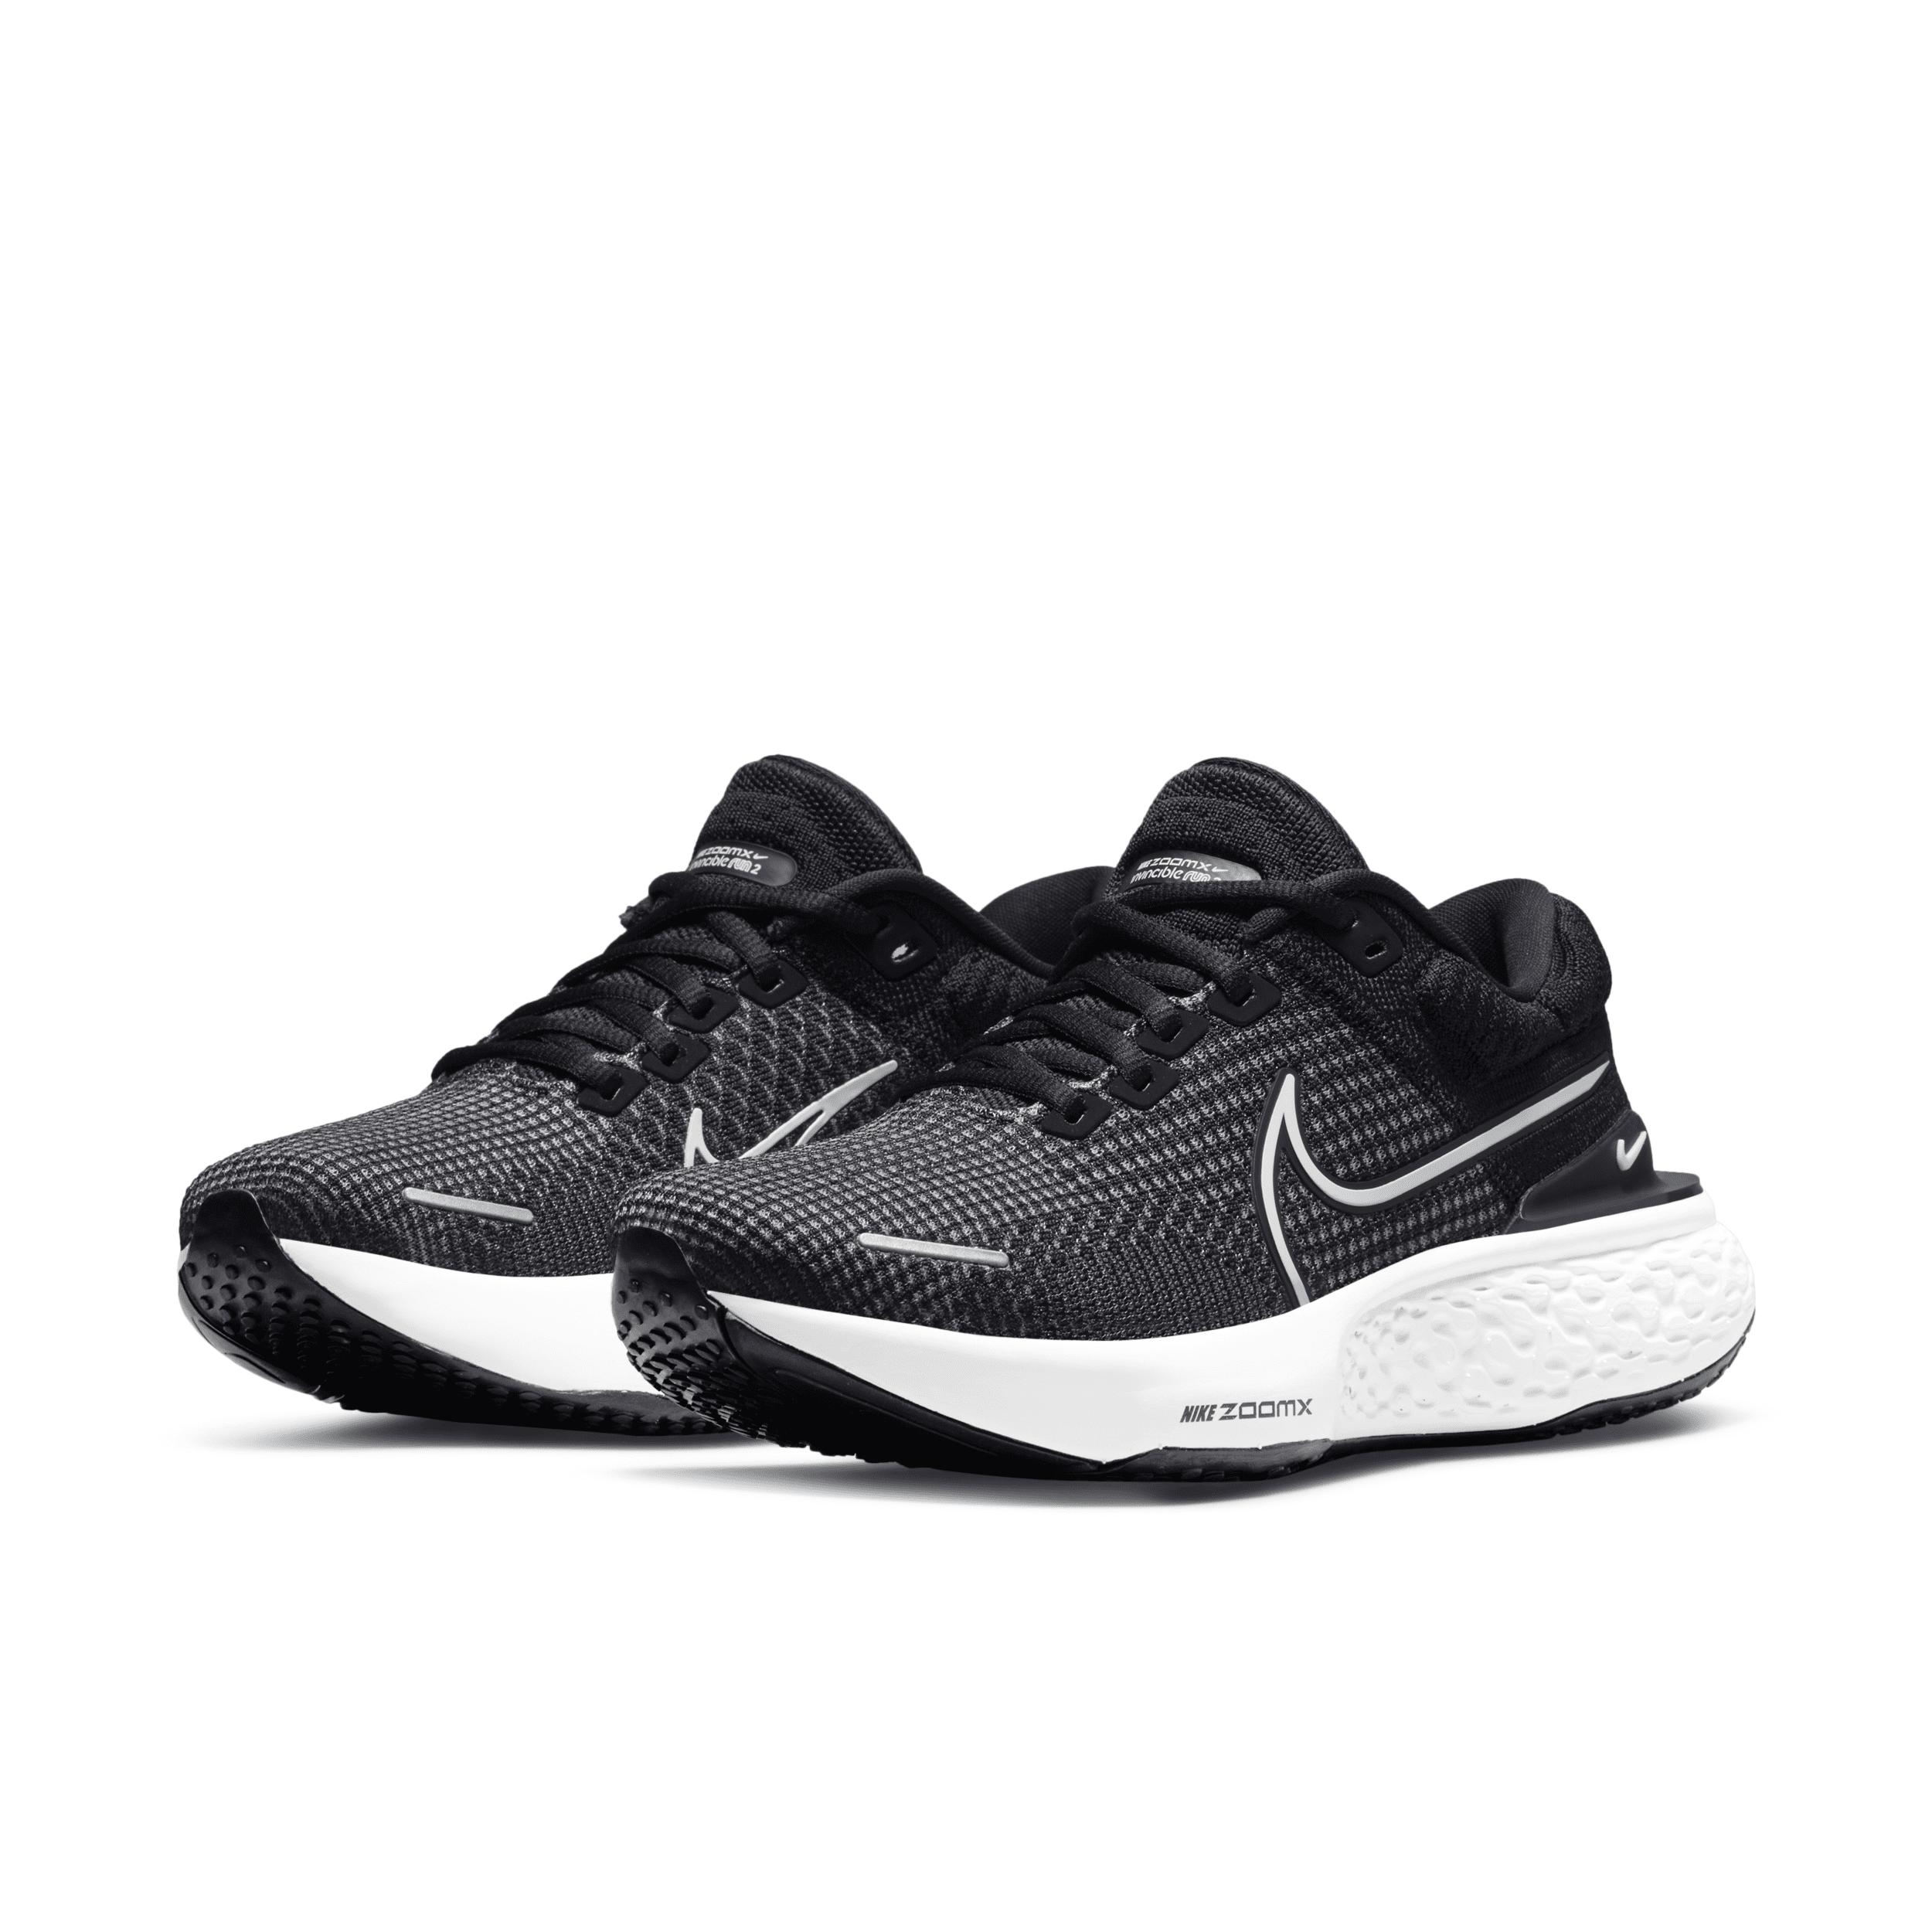 Nike Zoomx Invincible Run Flyknit 2 Road Running Shoes in Black | Lyst